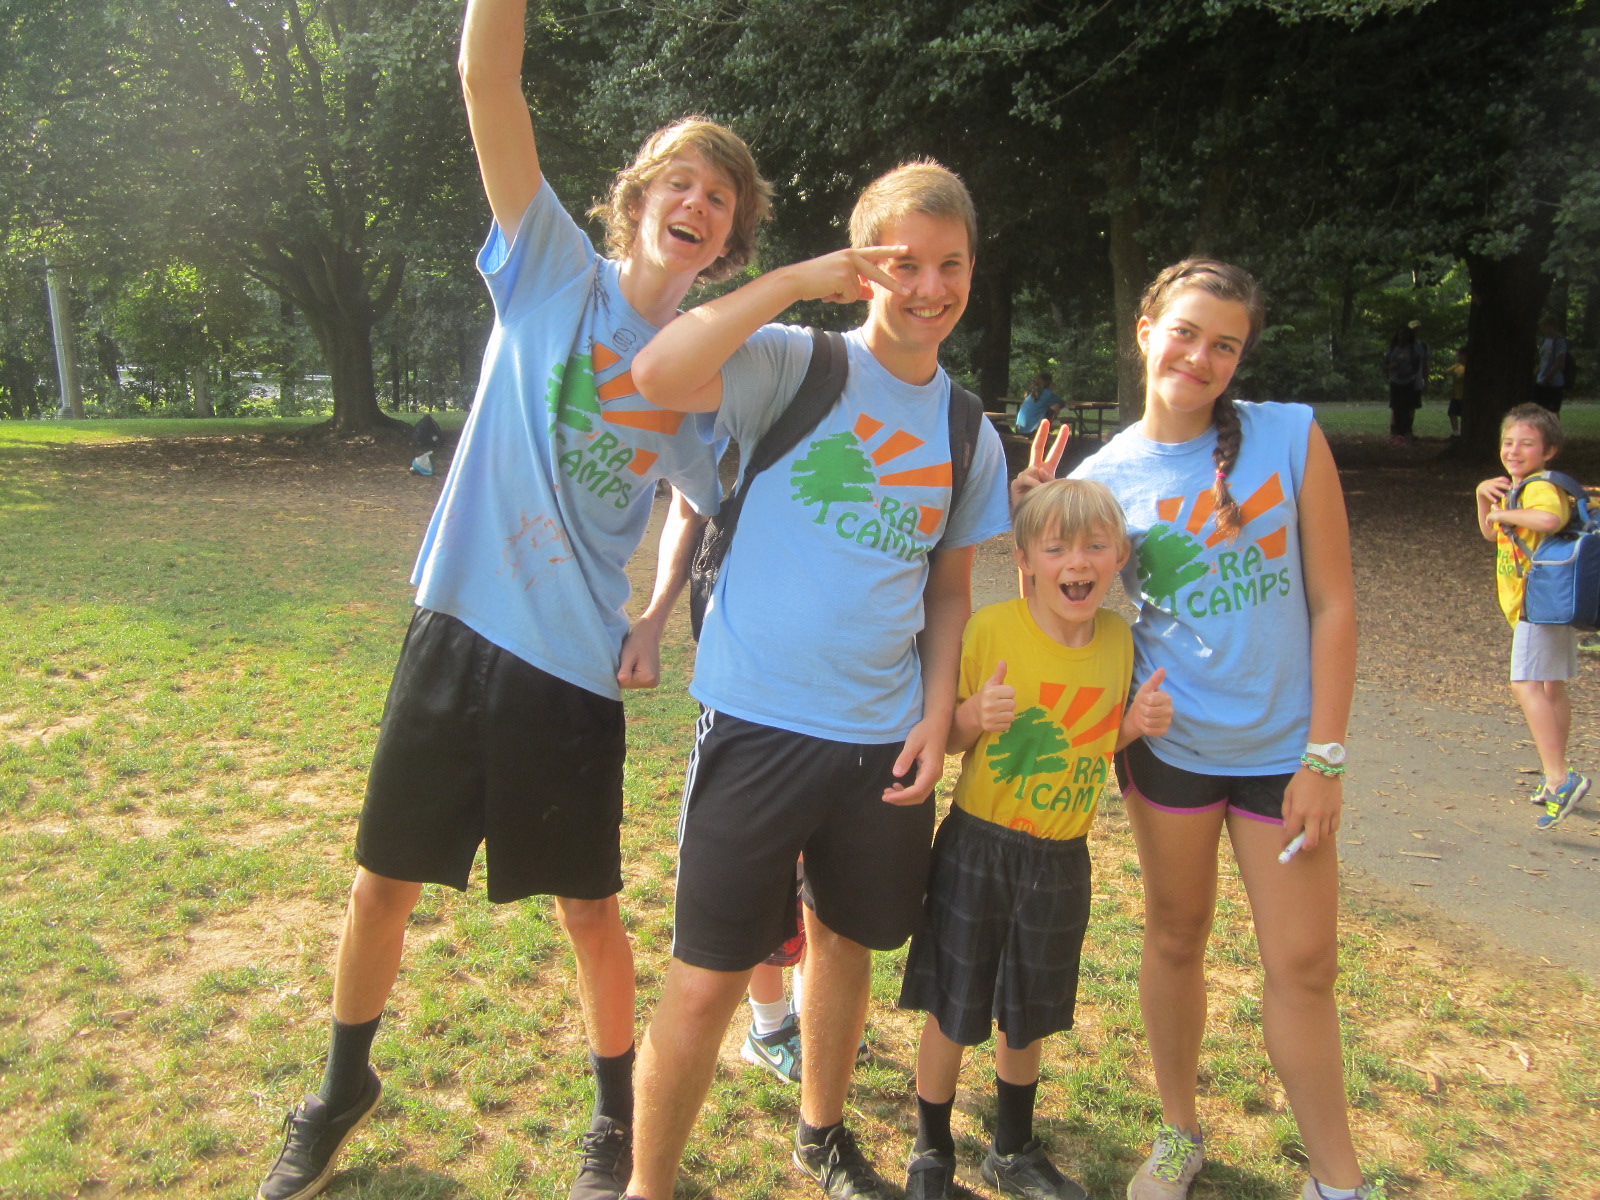 Russell with counsellors at Reston Association Camp